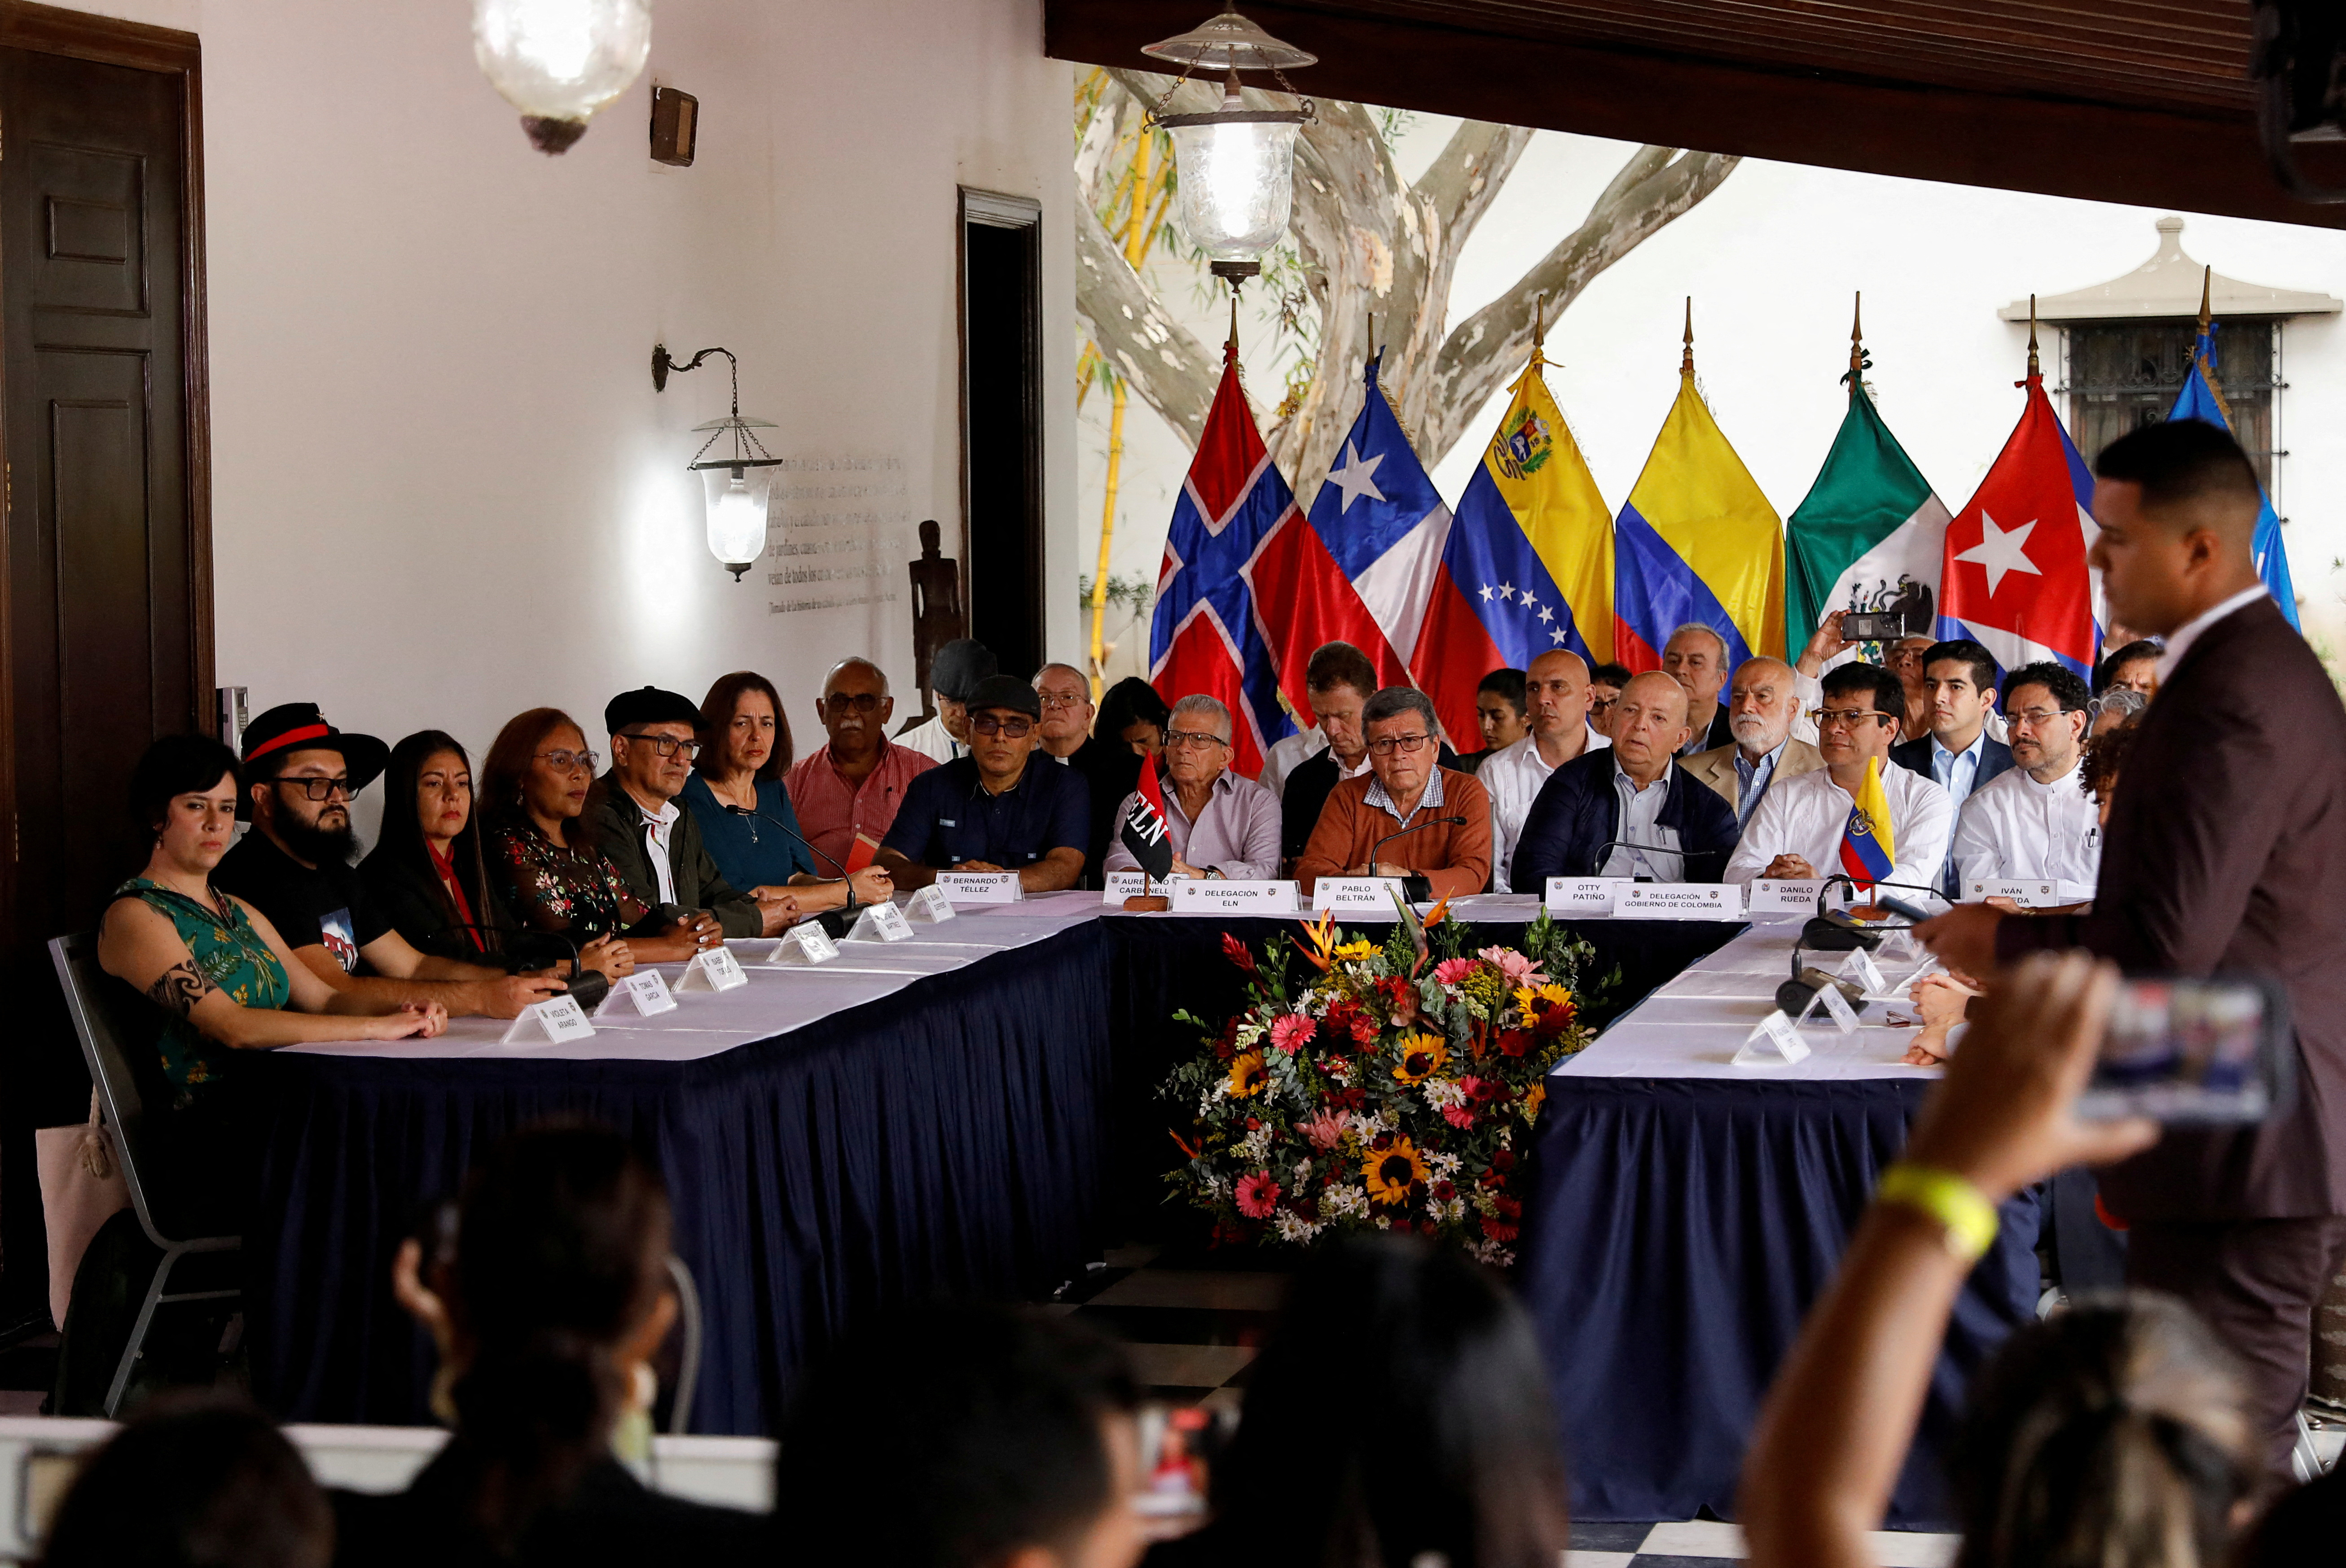 Colombia's government negotiators and National Liberation Army (ELN) members hold a news conference, in Caracas